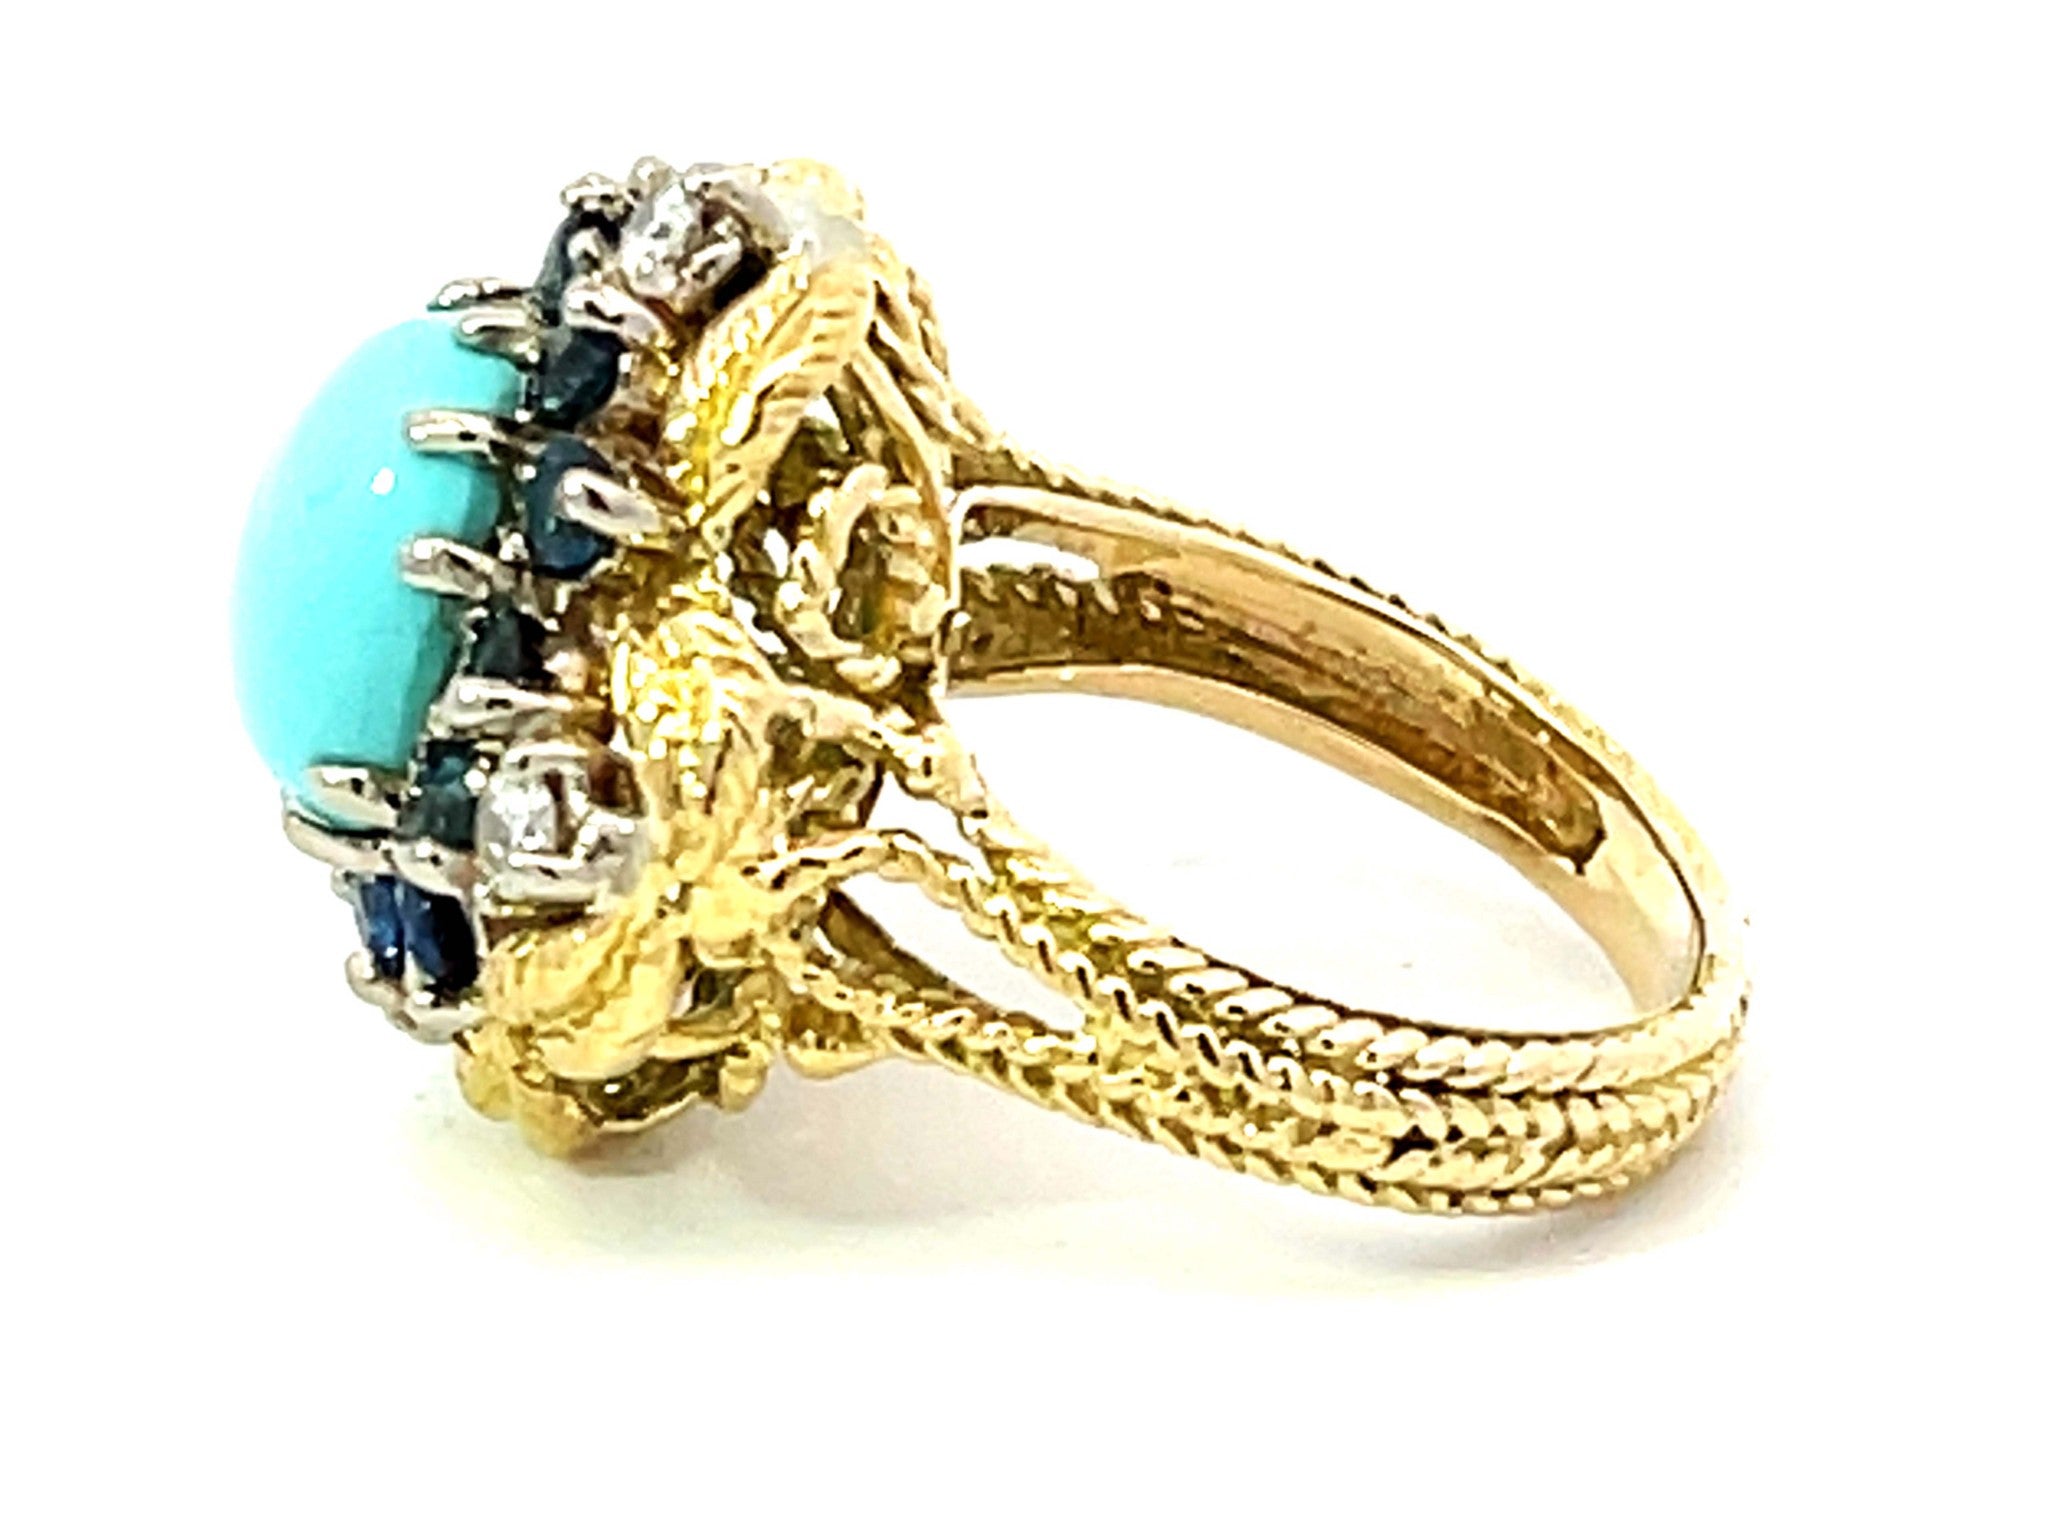 Vintage Turquoise Sapphire and Diamond Ring in 18k Yellow Gold